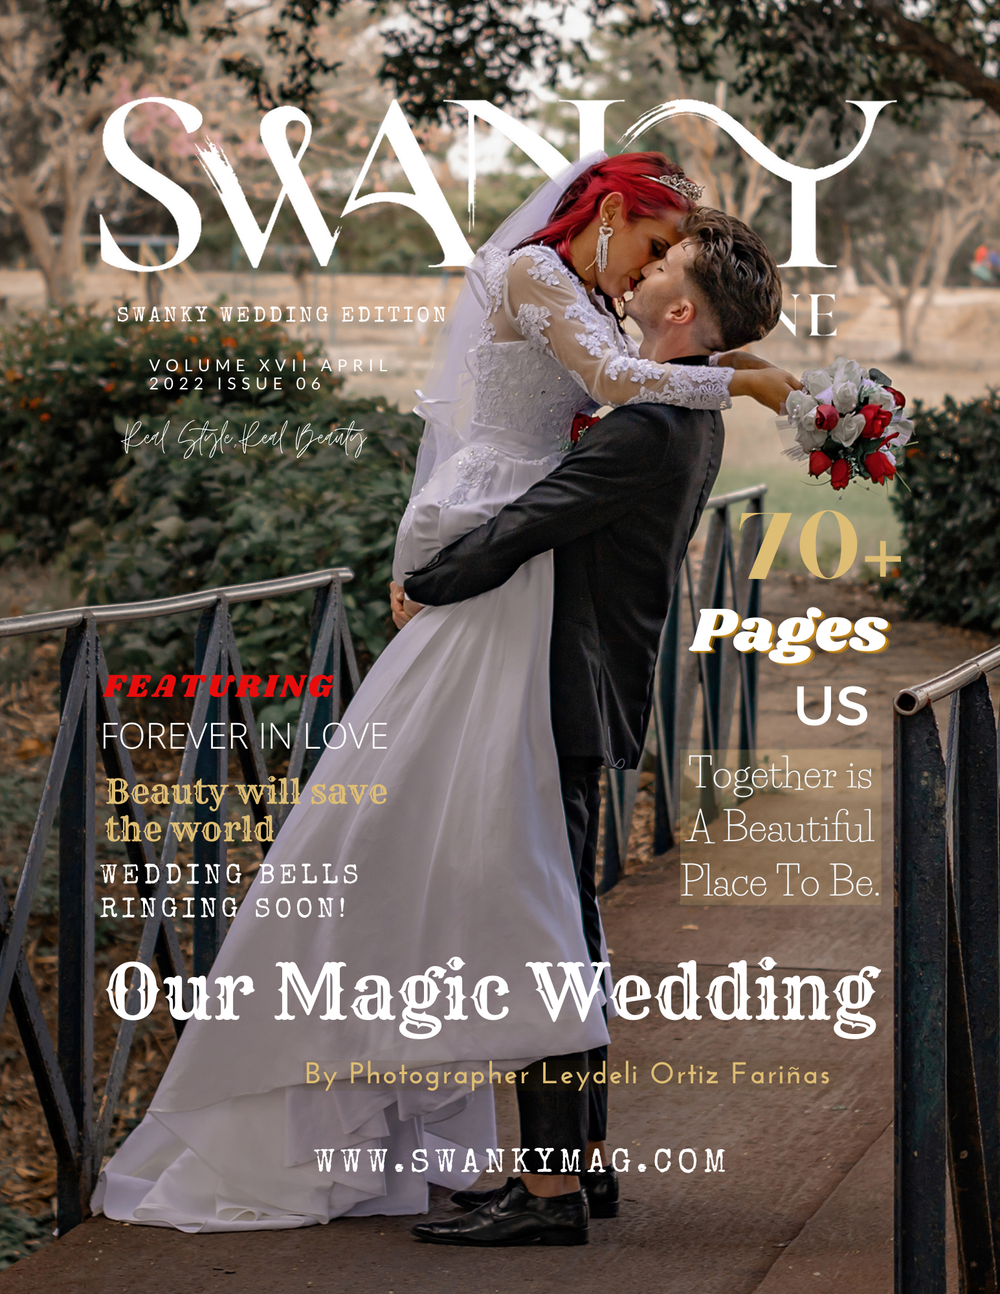 Swanky Wedding Editions April VOL XVII Issue 6 - PRINT ISSUE